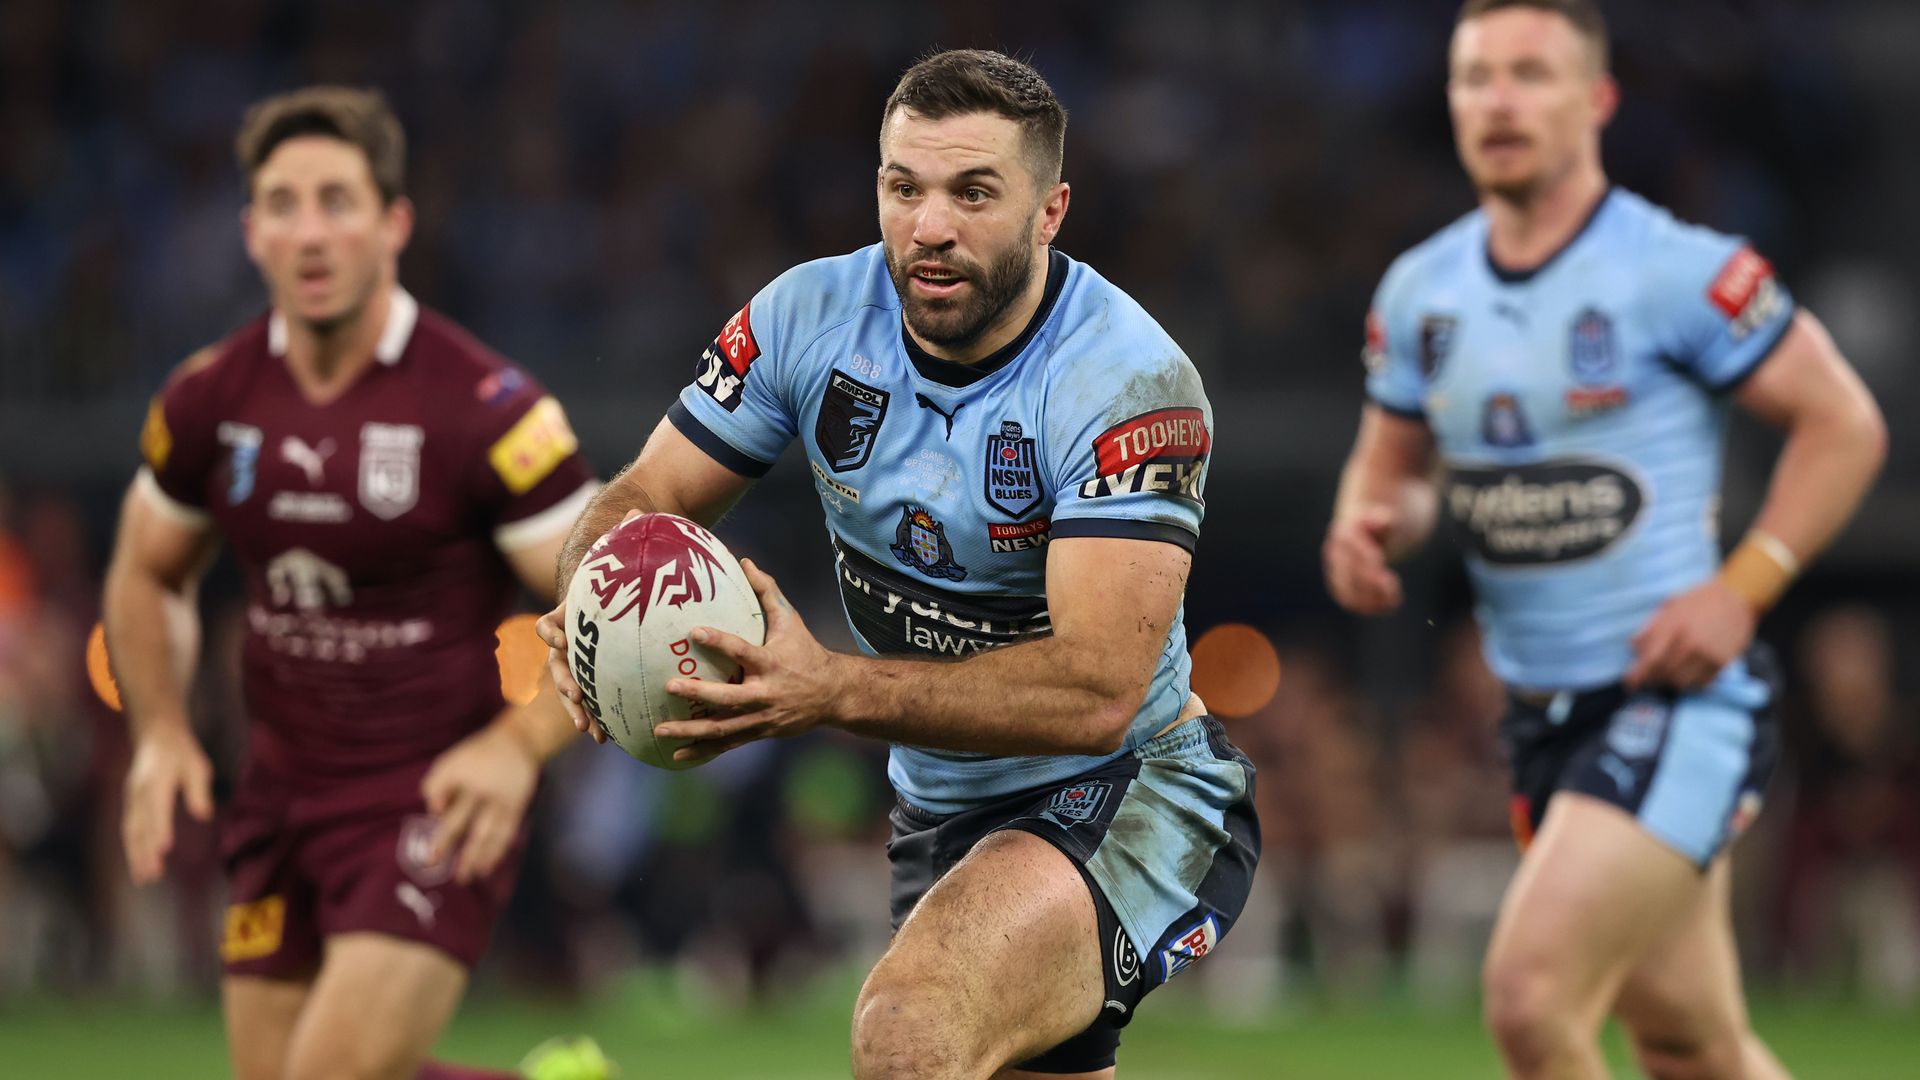 New South Wales vs Queensland live stream how to watch State of Origin